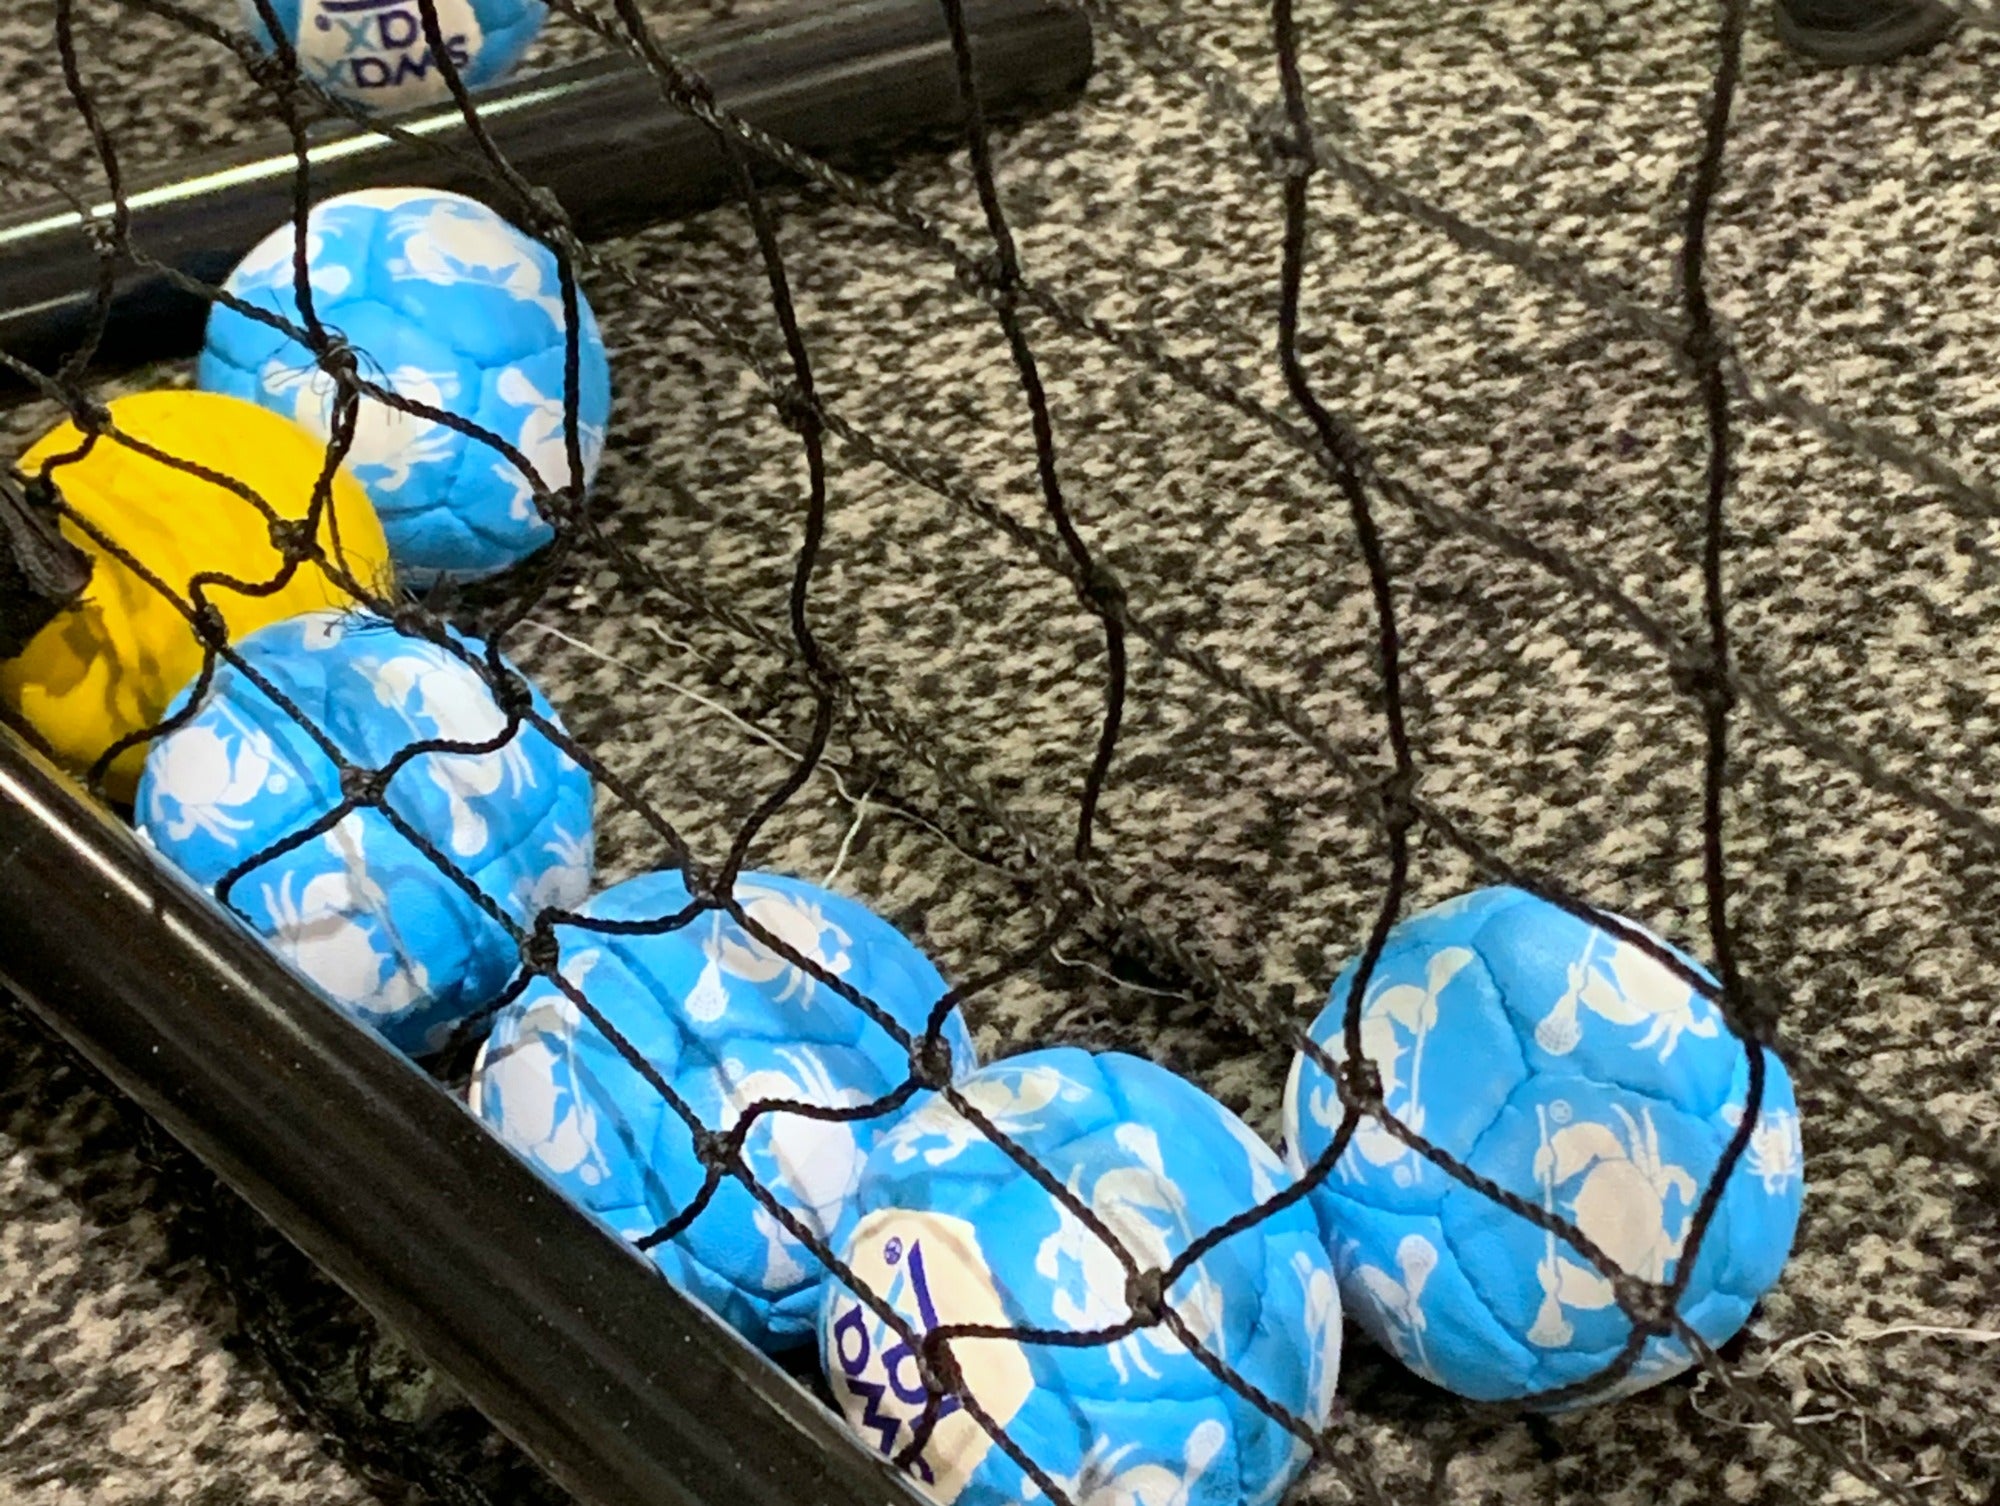 ECD using custom Swax Lax balls at their booth at LaxCon 2020 for games